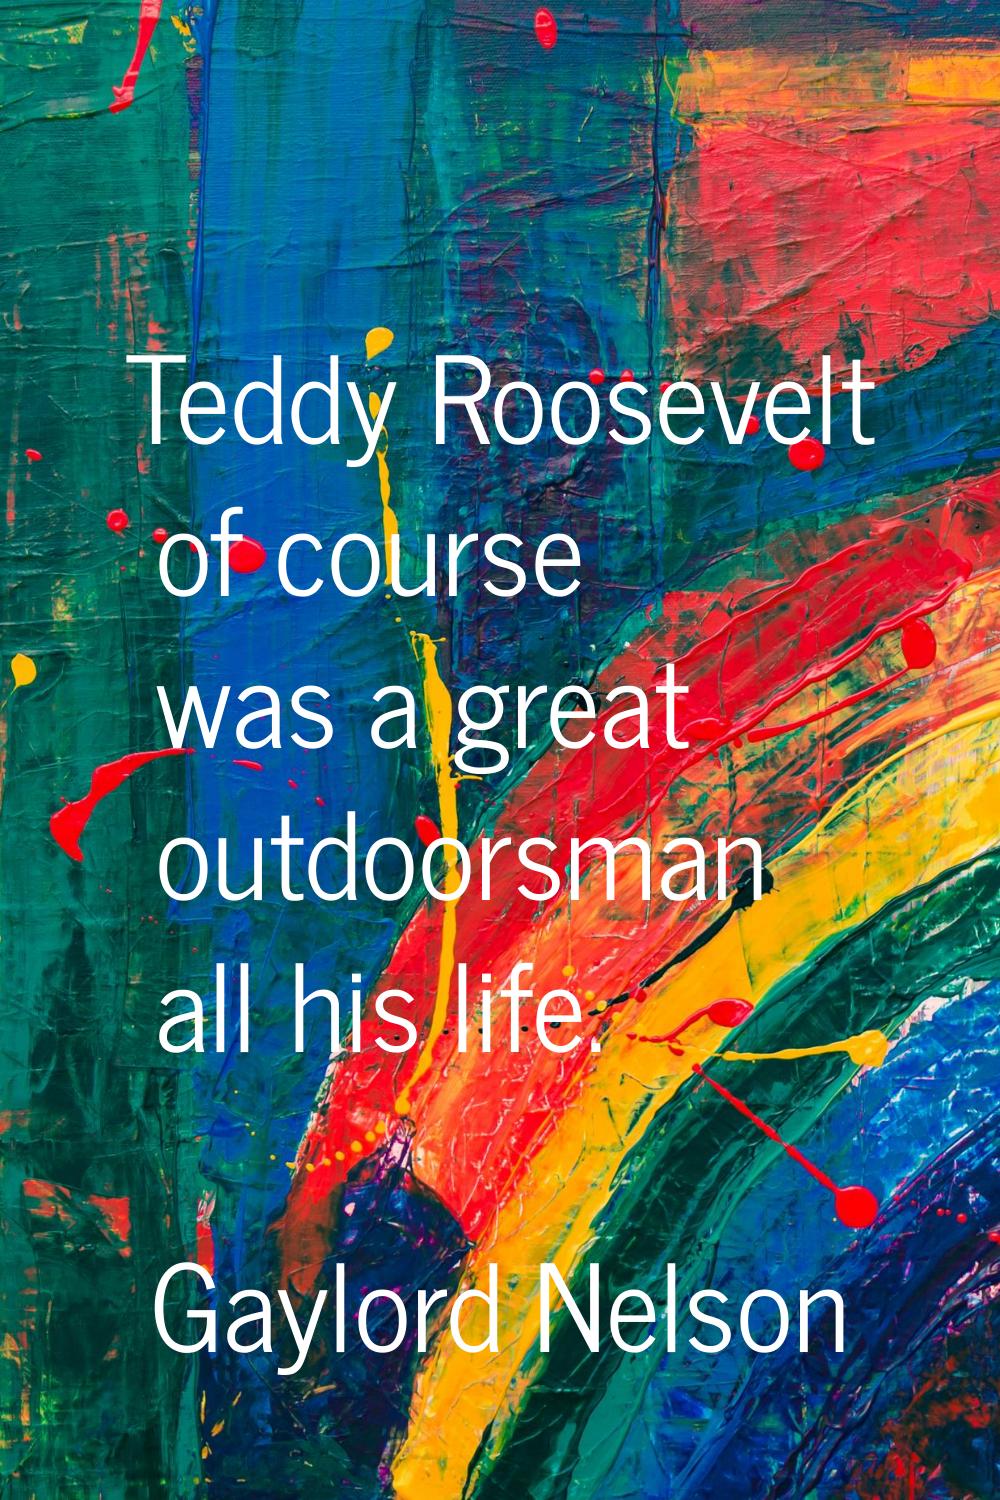 Teddy Roosevelt of course was a great outdoorsman all his life.